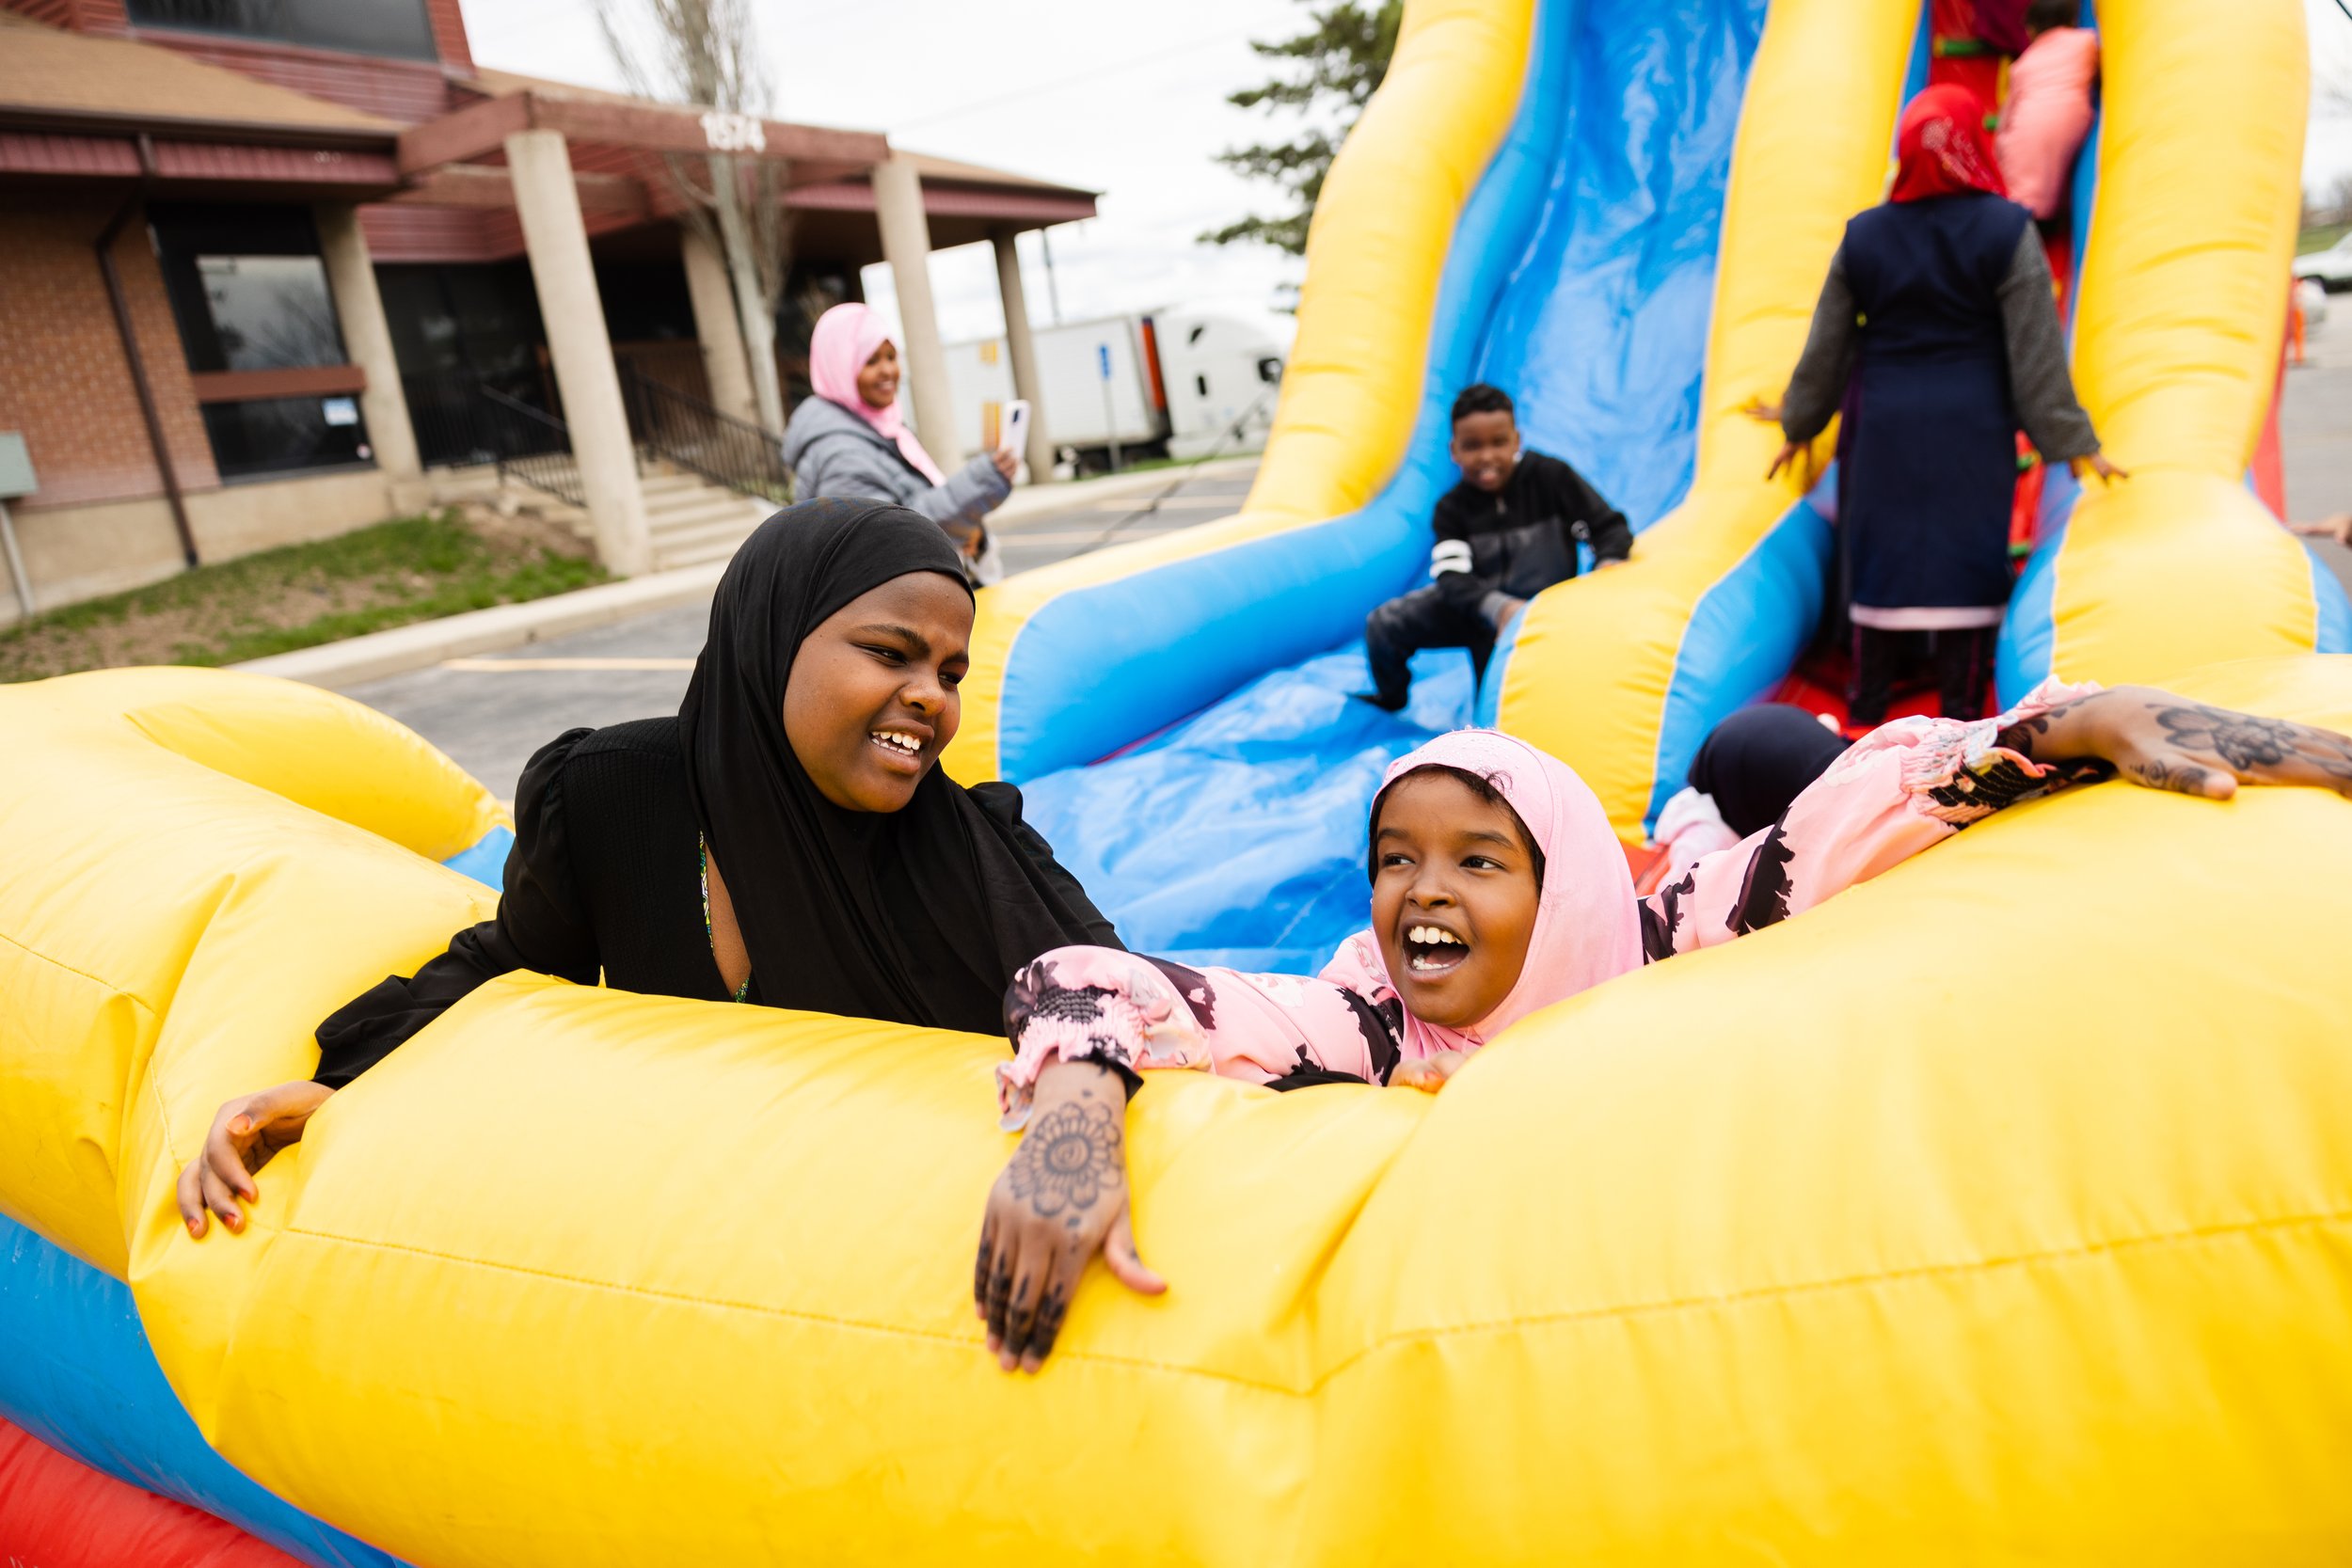  Filsan Salad, 10 years old, right, laughs while playing in an inflatable slide during the Eid al-Fitr celebration at Hartland Partnership Center in Salt Lake City on April 22, 2023. 